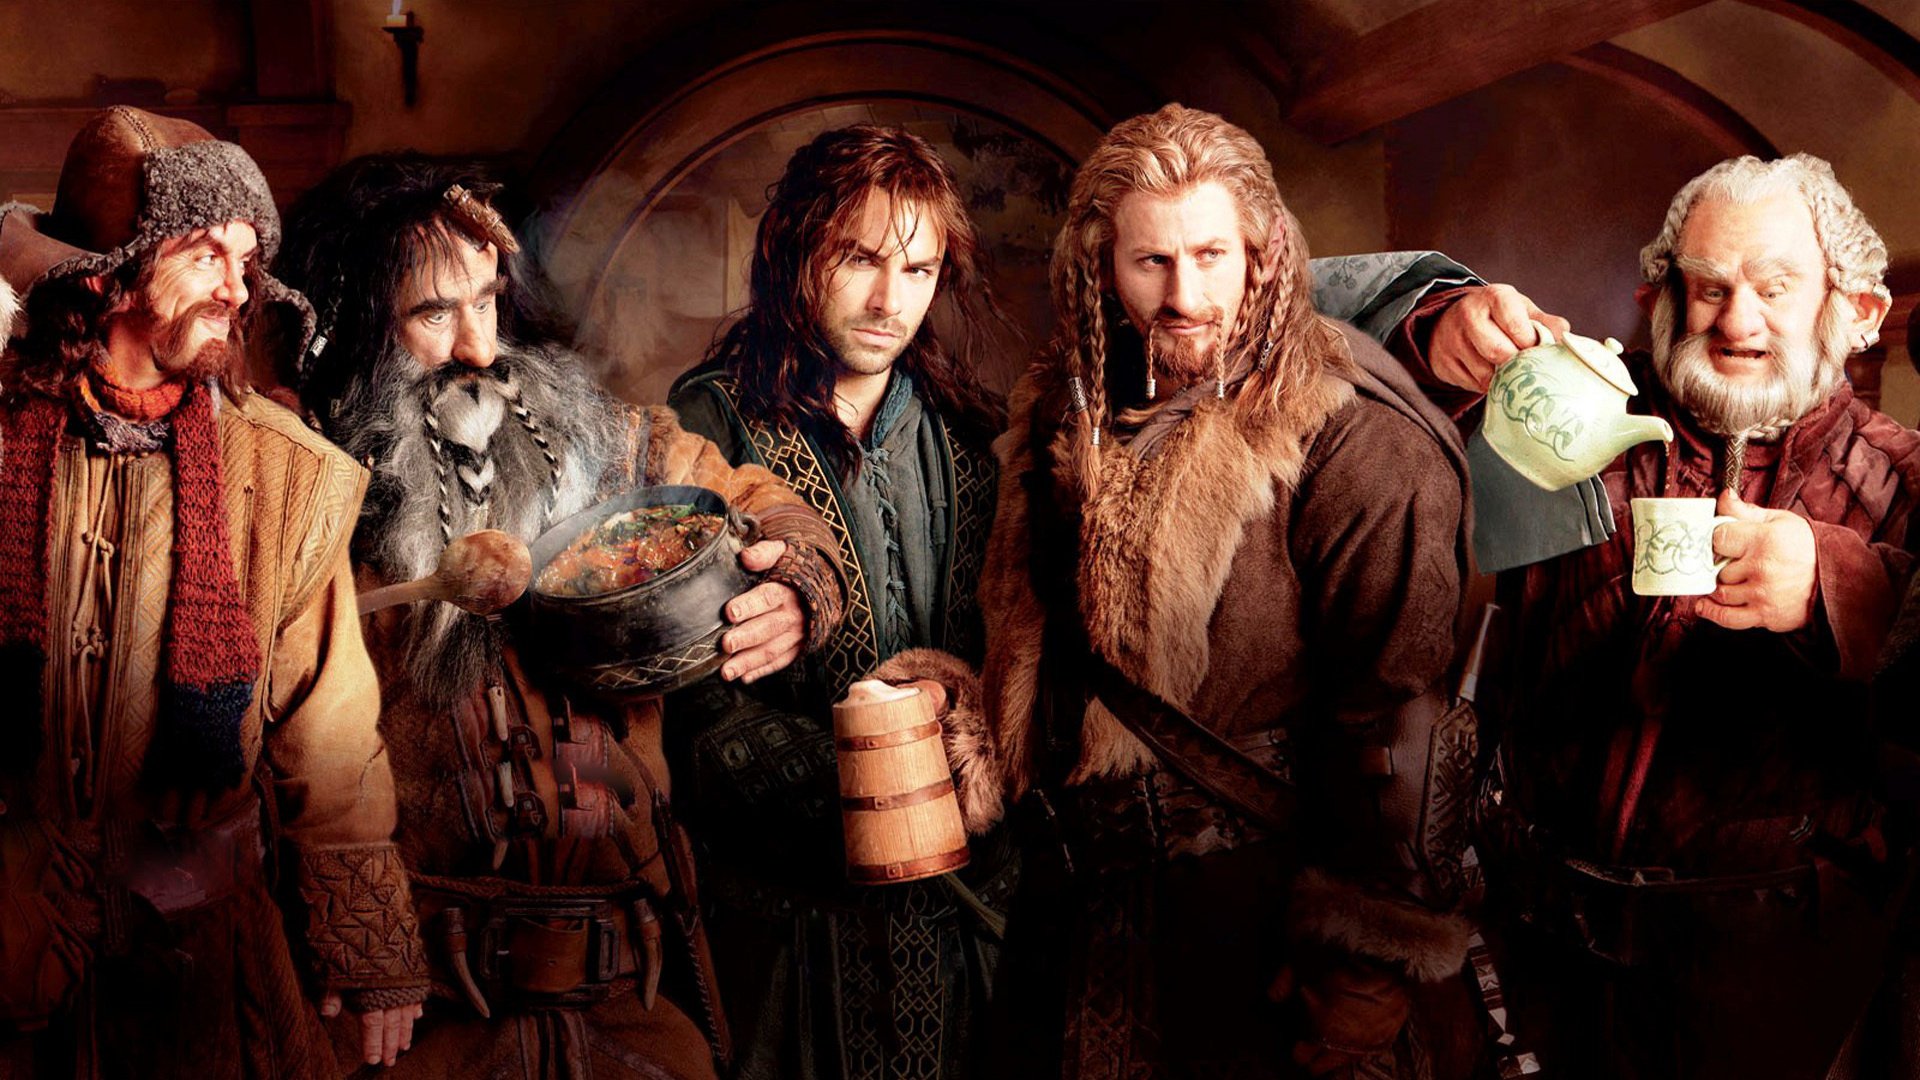 The Hobbit: An Unexpected Journey download the last version for ipod